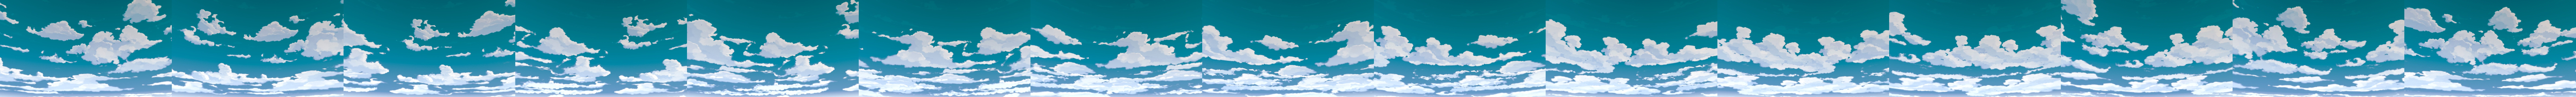 Anime / manga looking clouds - how ? - Lighting and Rendering - Blender  Artists Community